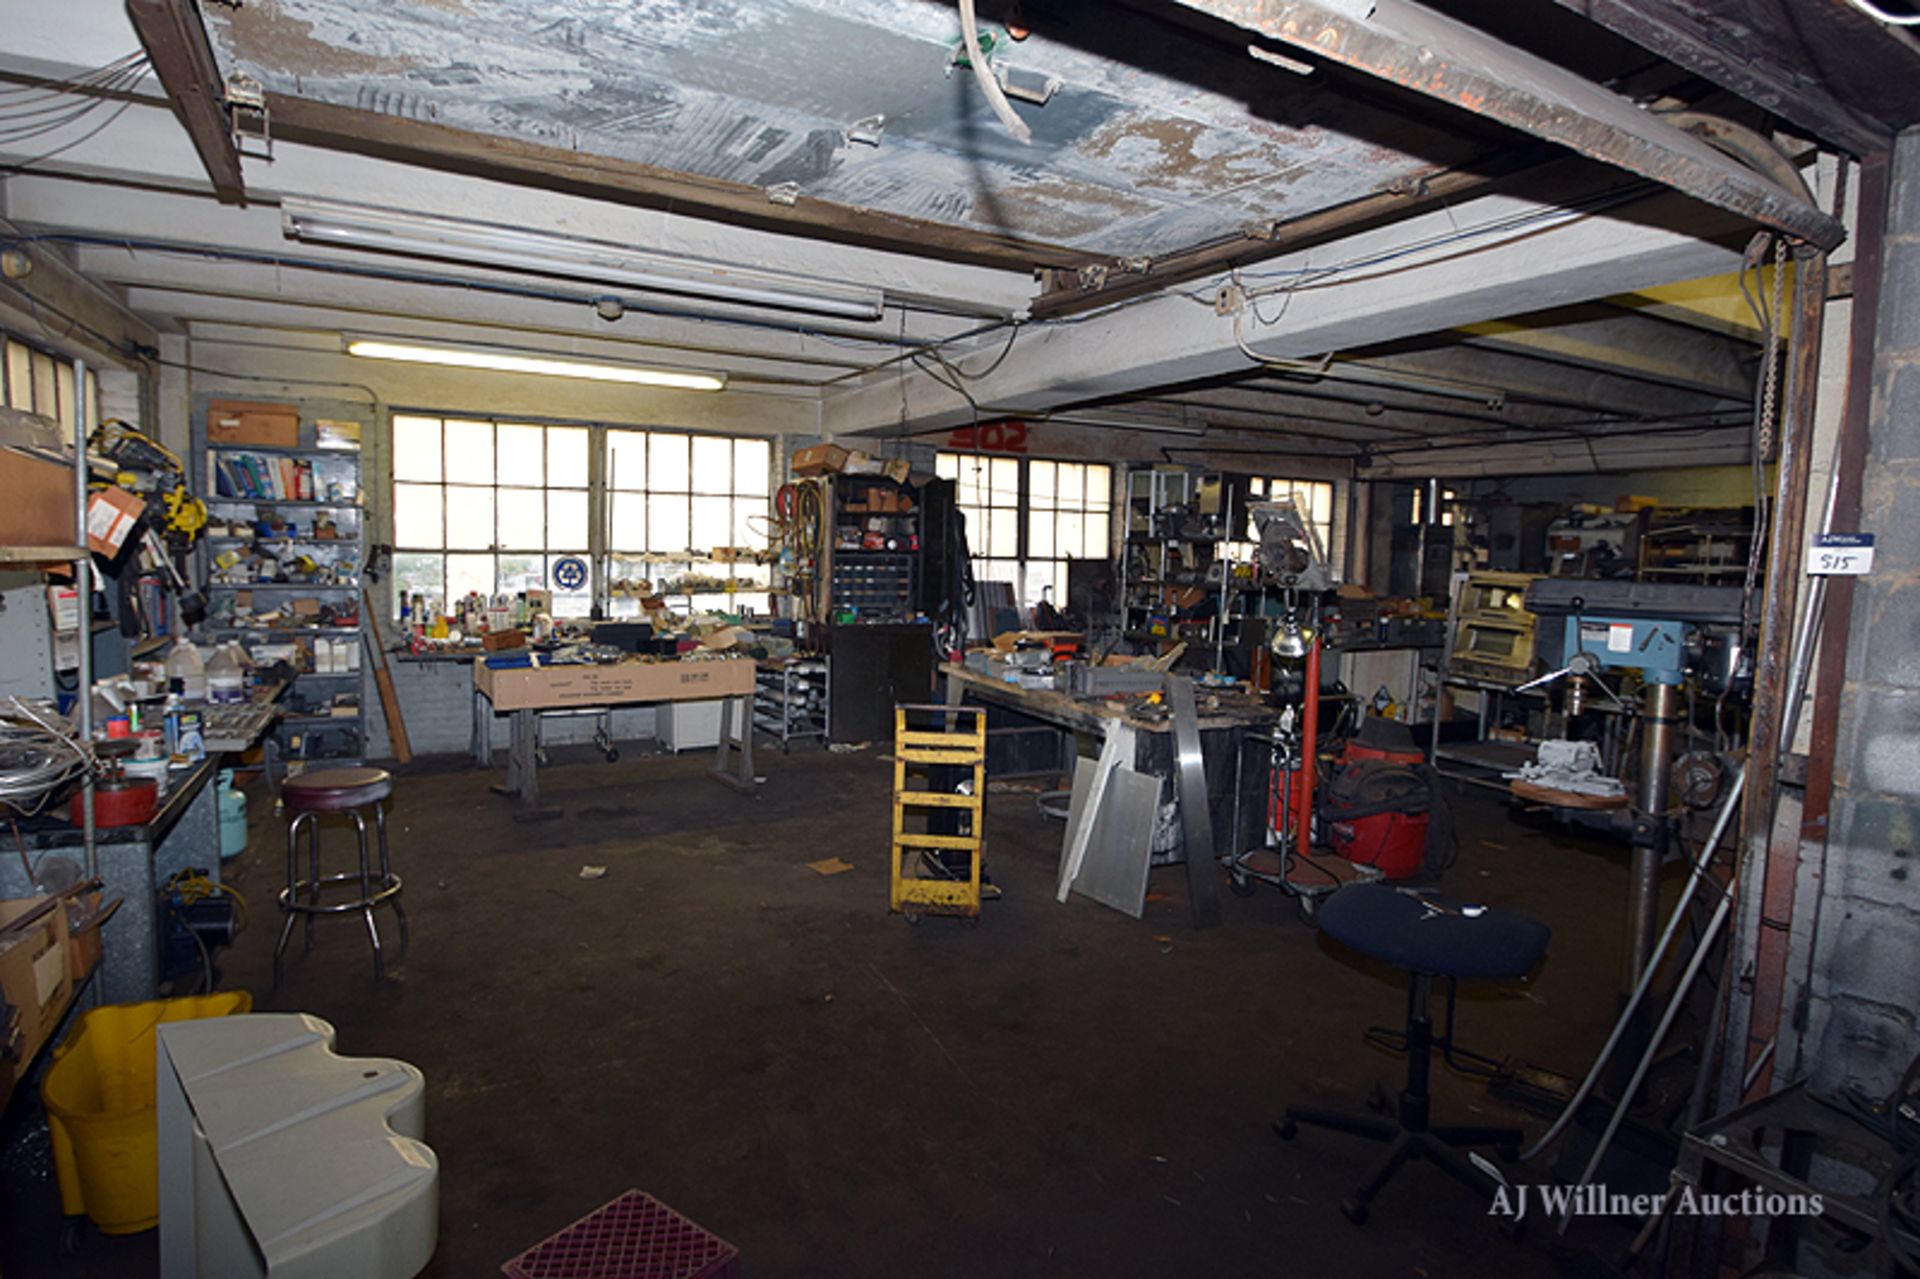 Contents of Workshop; Tools, Vacuums, Parts, Etc. - Image 13 of 13